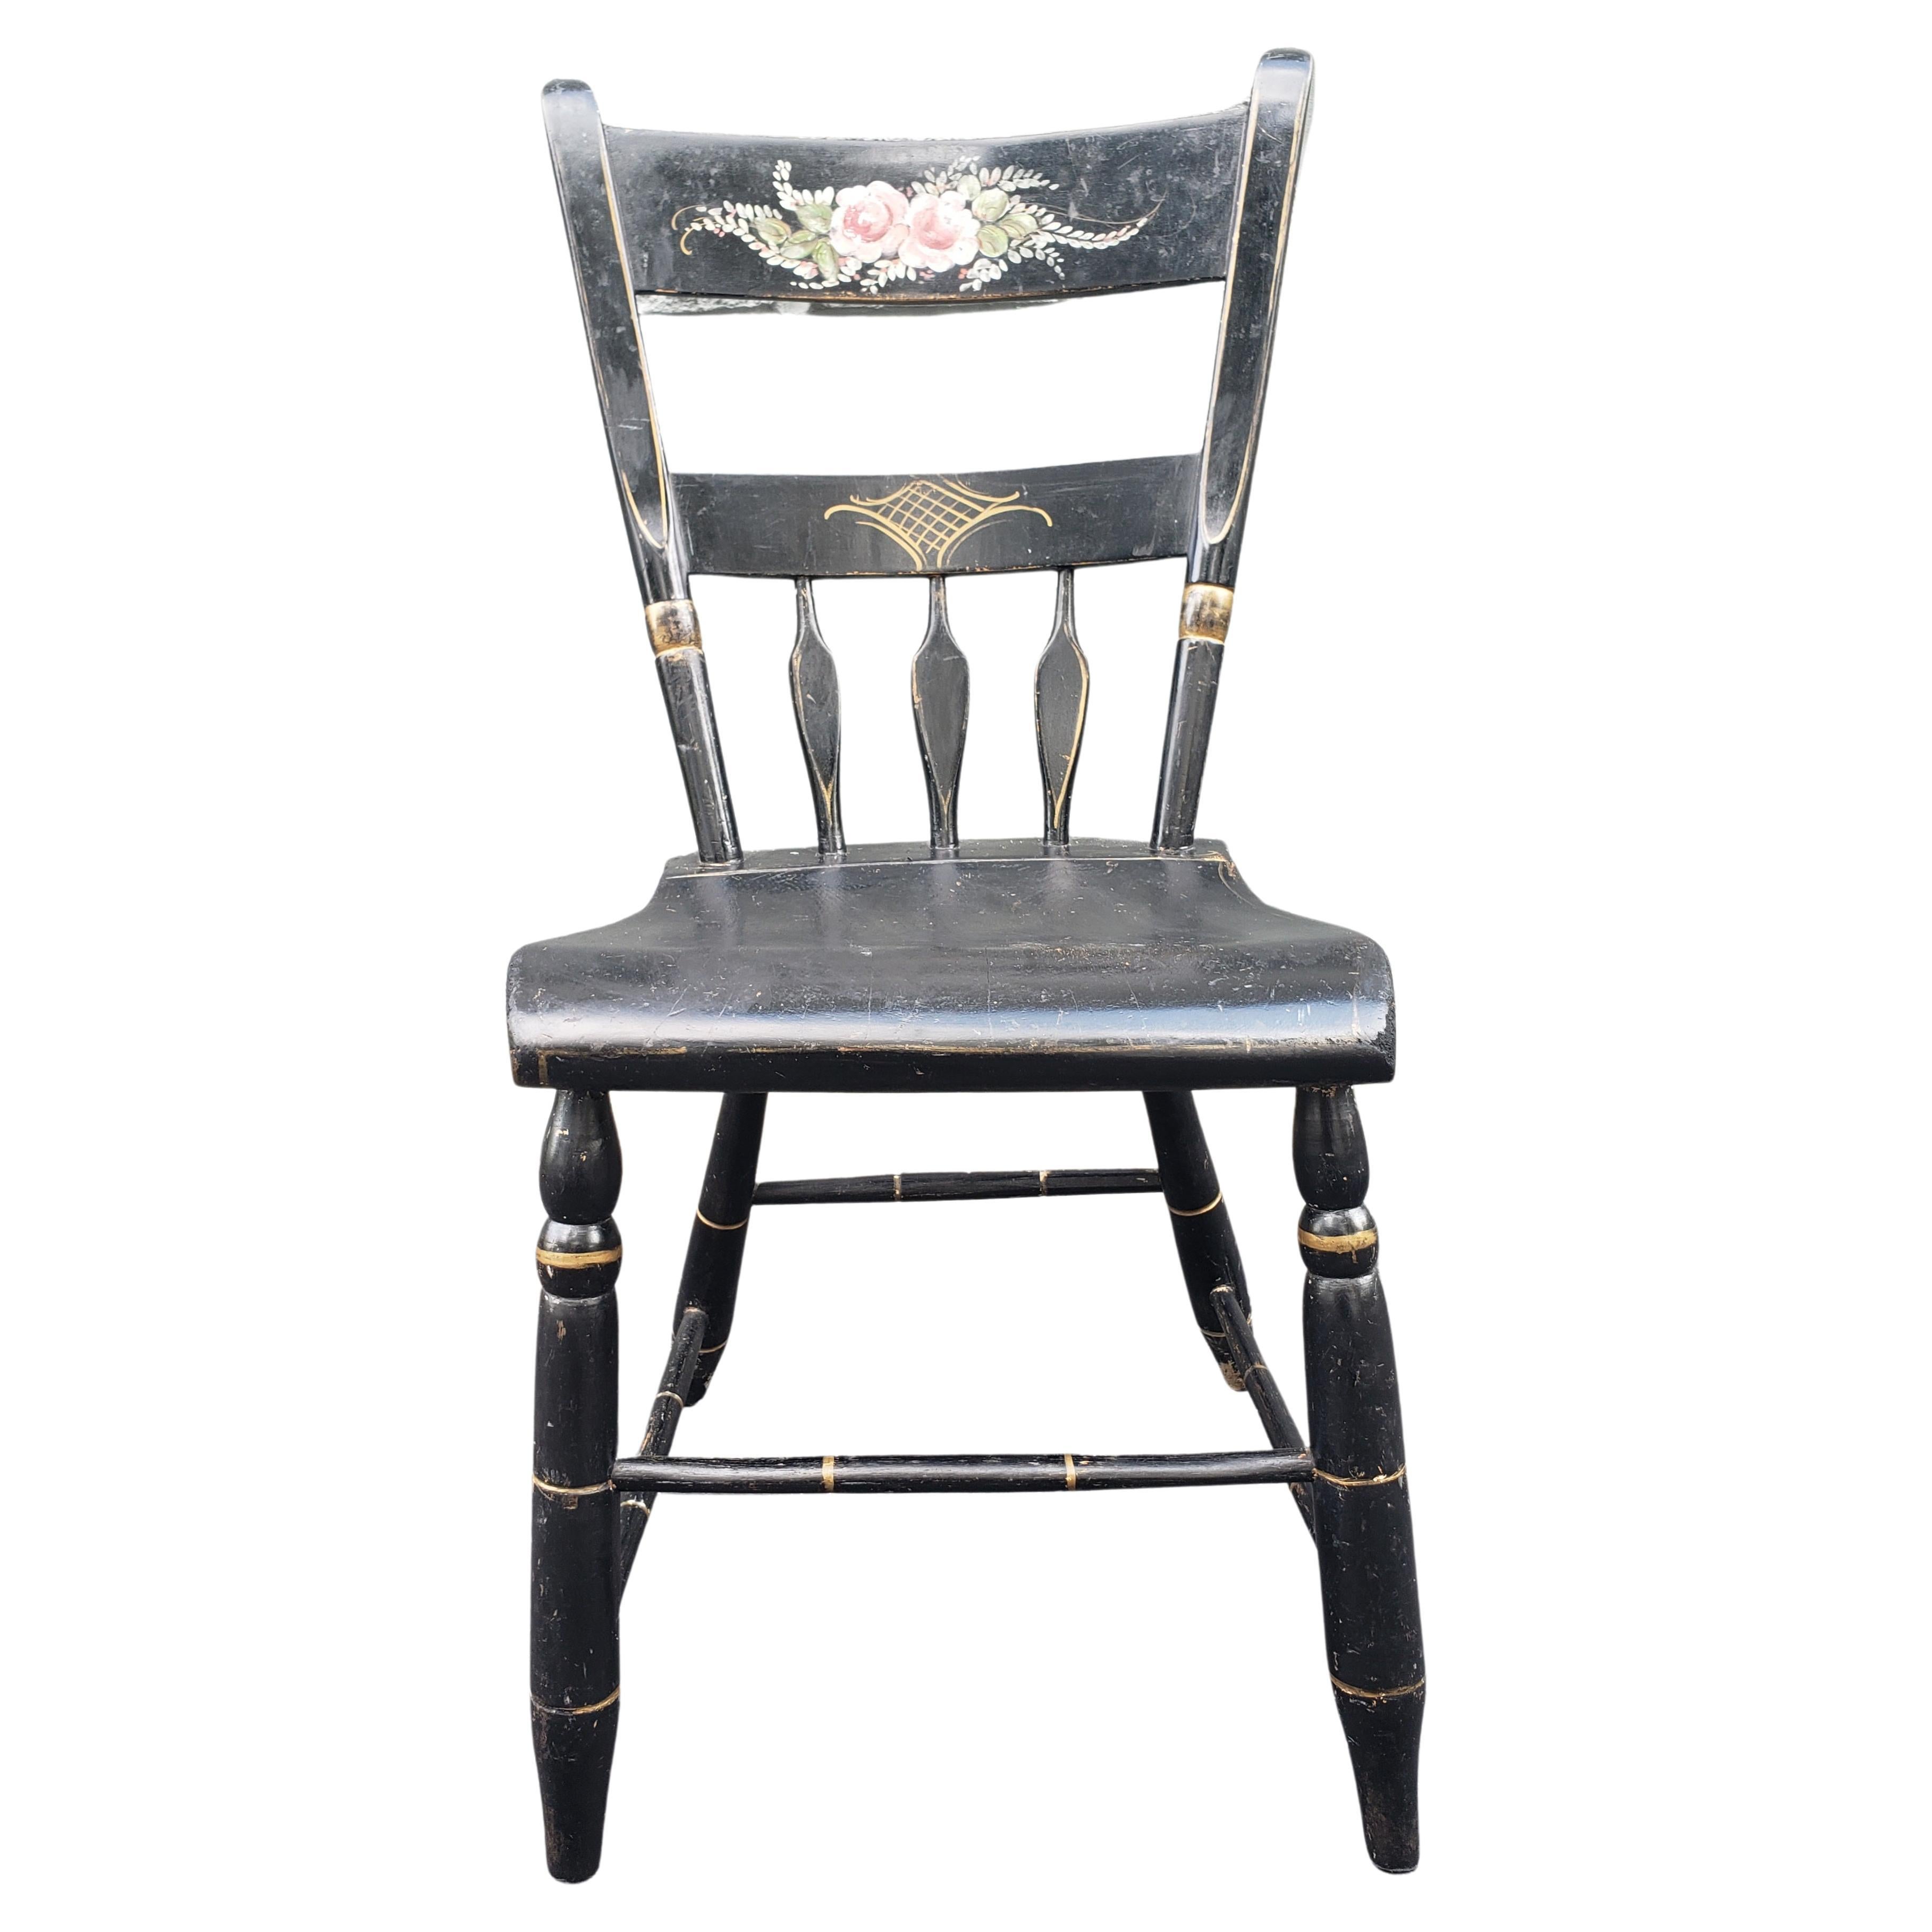 Late Victorian Style Ebonized and Decorated Maple Plank Chair For Sale